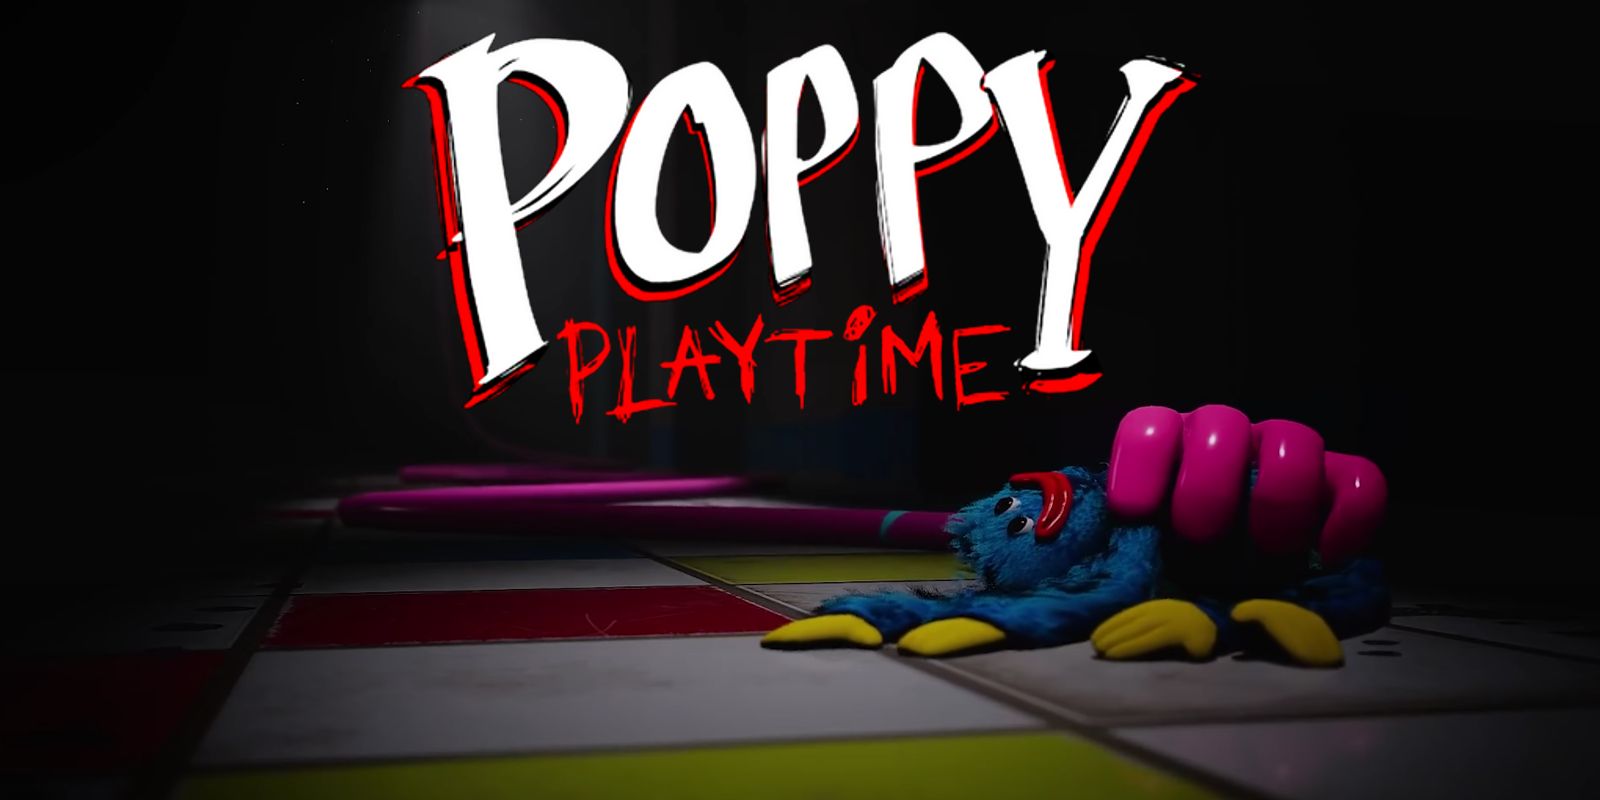 Poppy Playtime Chapter 2 Release Date Confirmed, Launches This Week